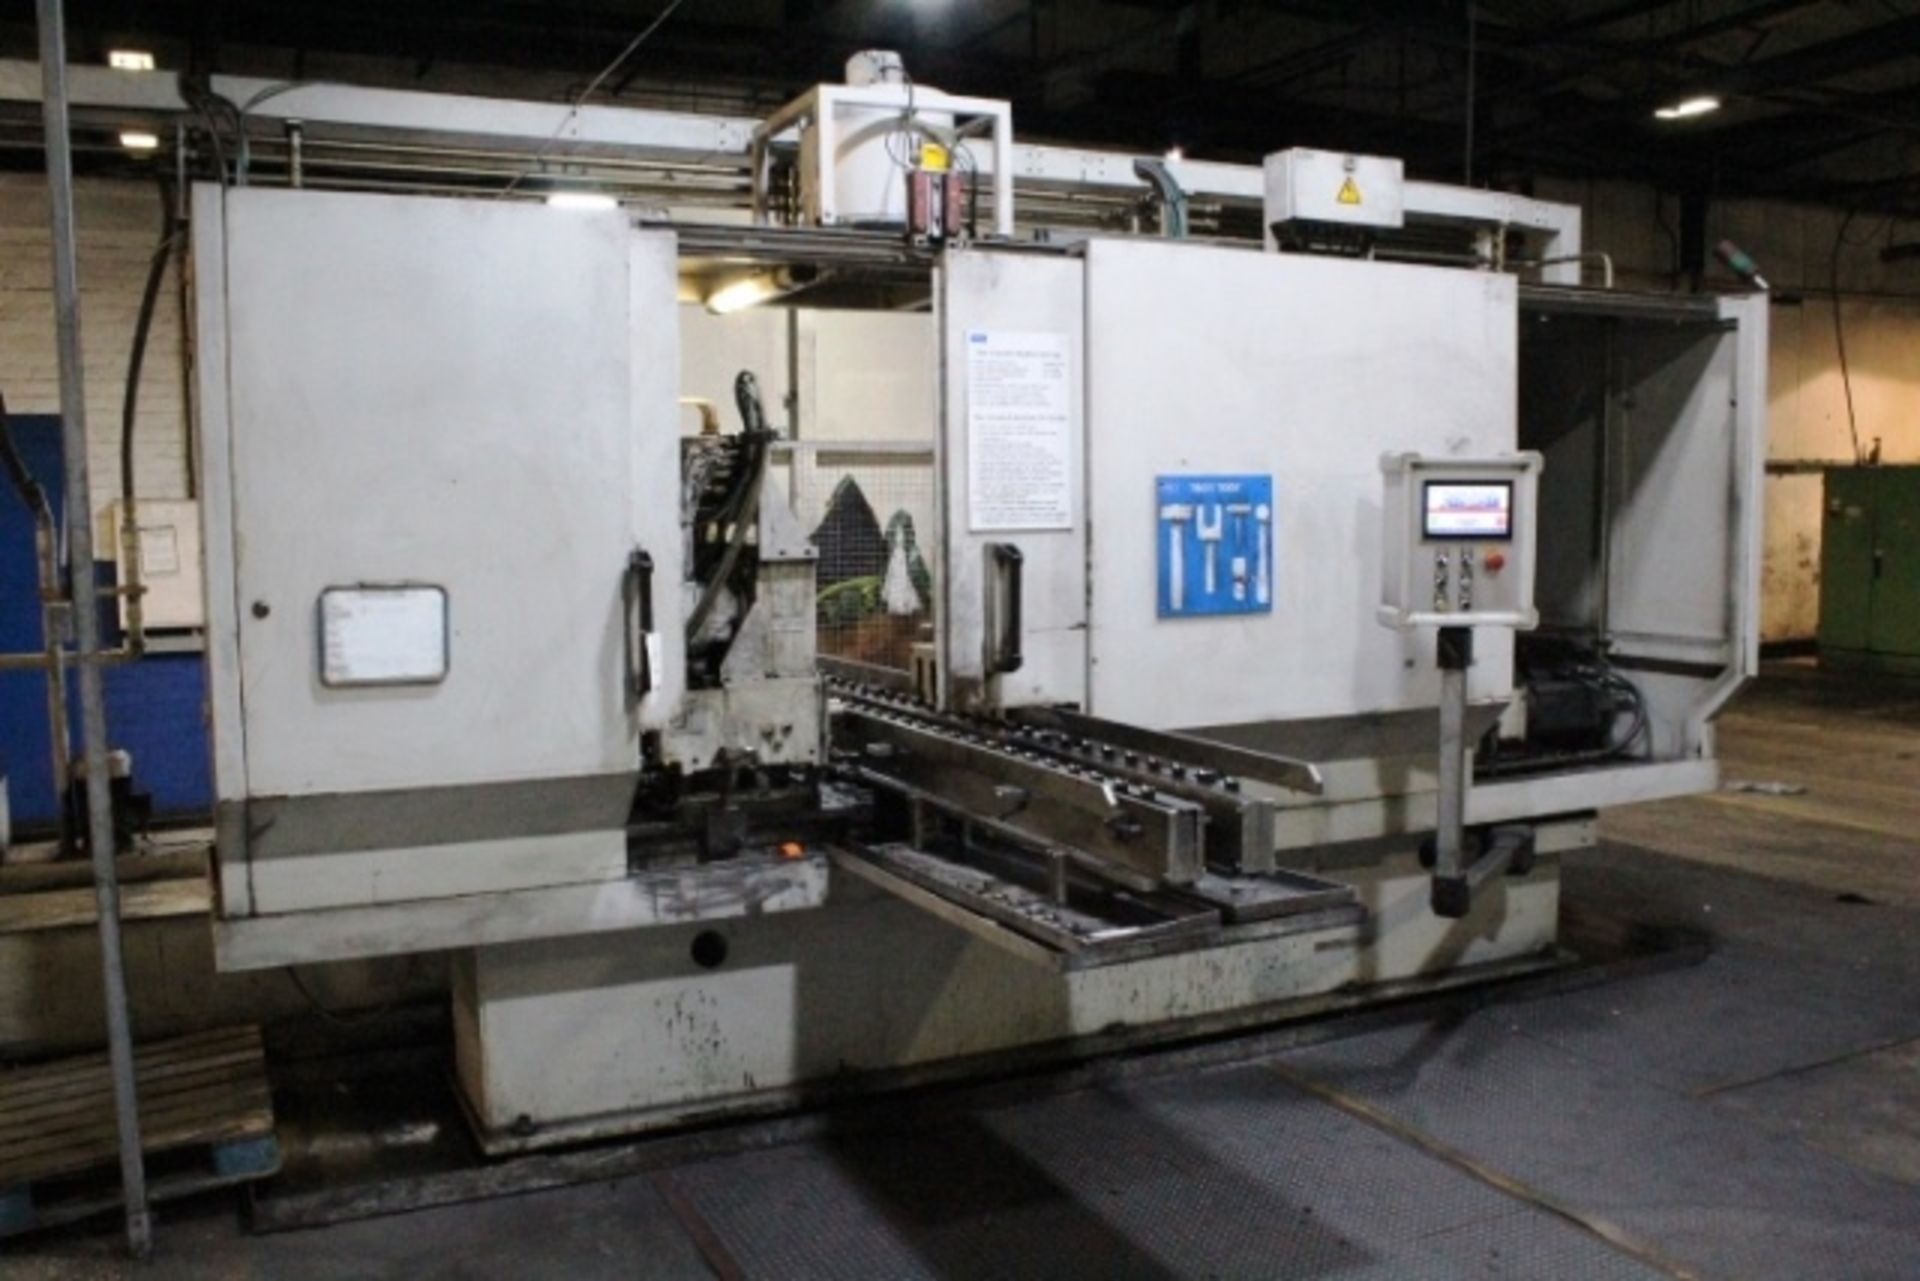 Tibo TBT M320-6-1200, 6 spindle gun drill, 31 station fixed component feed table with Tibo touch